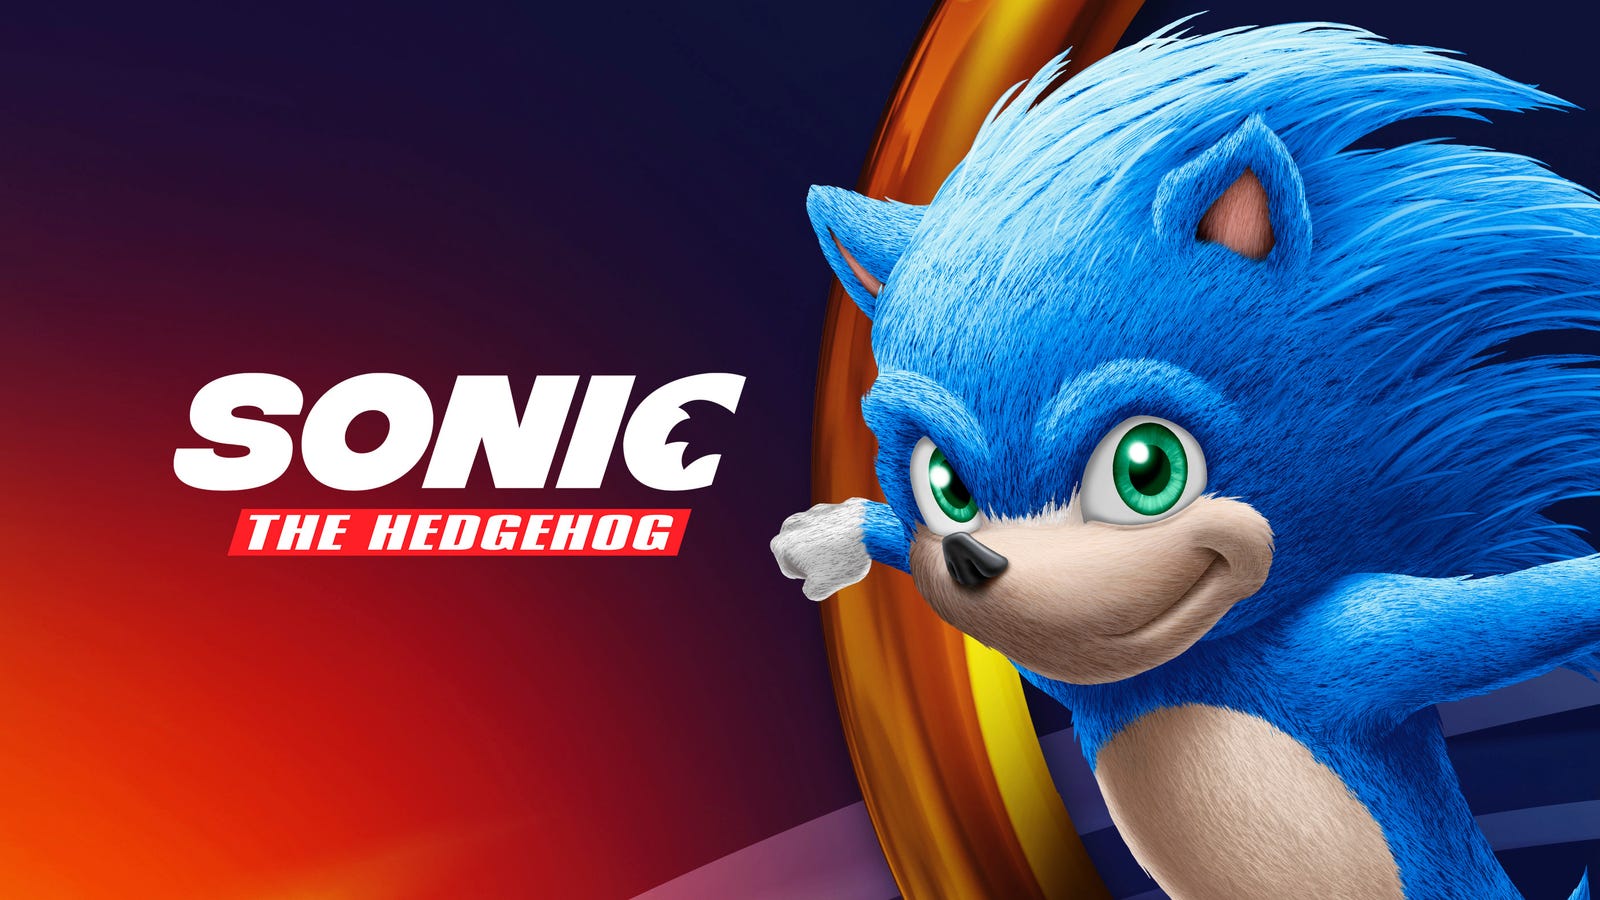 This Is Probably The Movie Version Of Sonic The Hedgehog1600 x 900